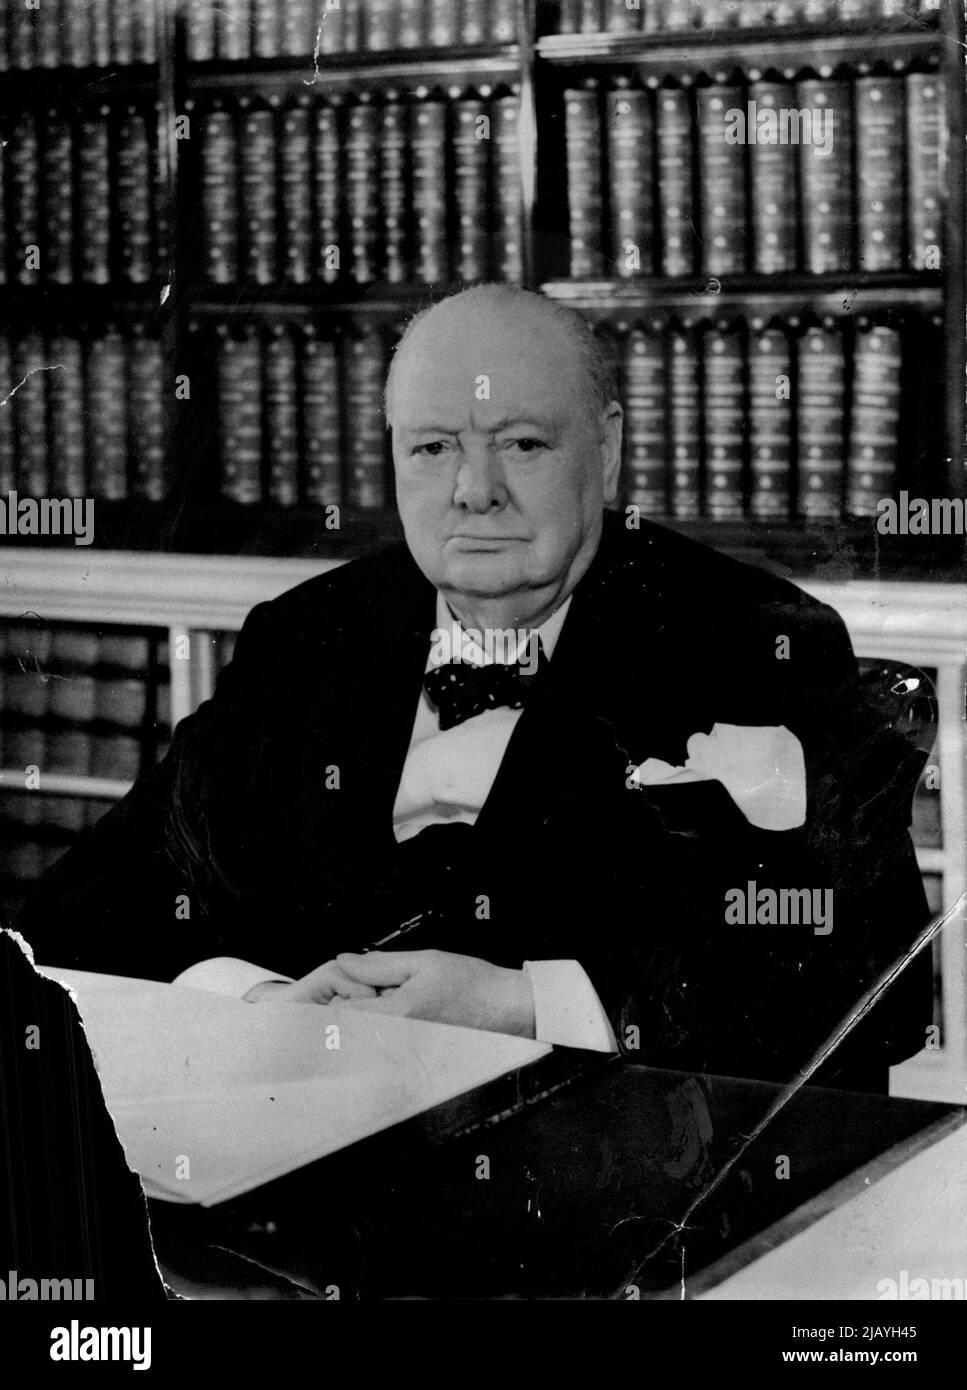 Churchill's Birthday Picture: The latest picture of Britain Premier Sir Winston Churchill made for his 79th birthday, which he celebrates on Monday, November 30. The picture was taken in the Cabinet Room at 10, Downing Street, official London residence of British Prime Ministers. On Tuesday 1st December Sir Winston leaves for the momentous Big Powers meeting in Bermuda. November 27, 1953. (Photo by Reuterphoto). Stock Photo